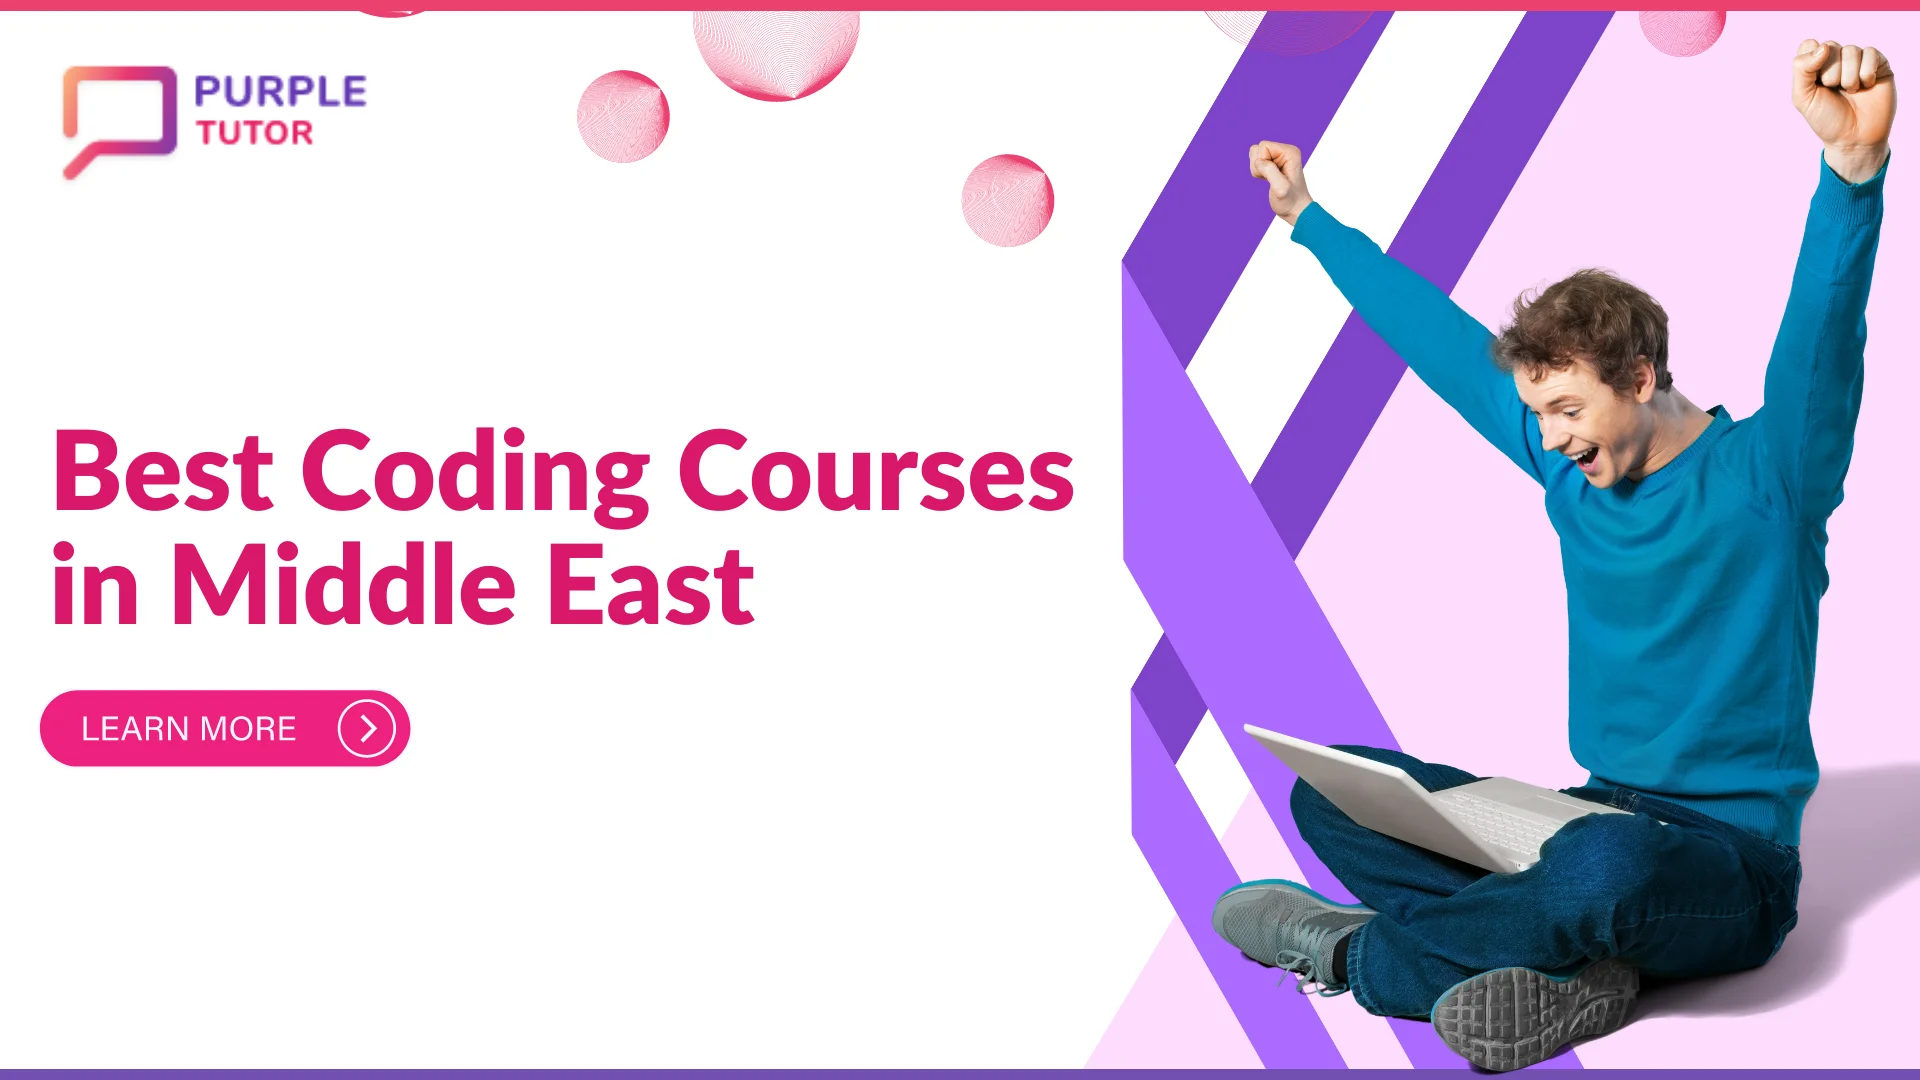 Best Coding Courses in Middle East